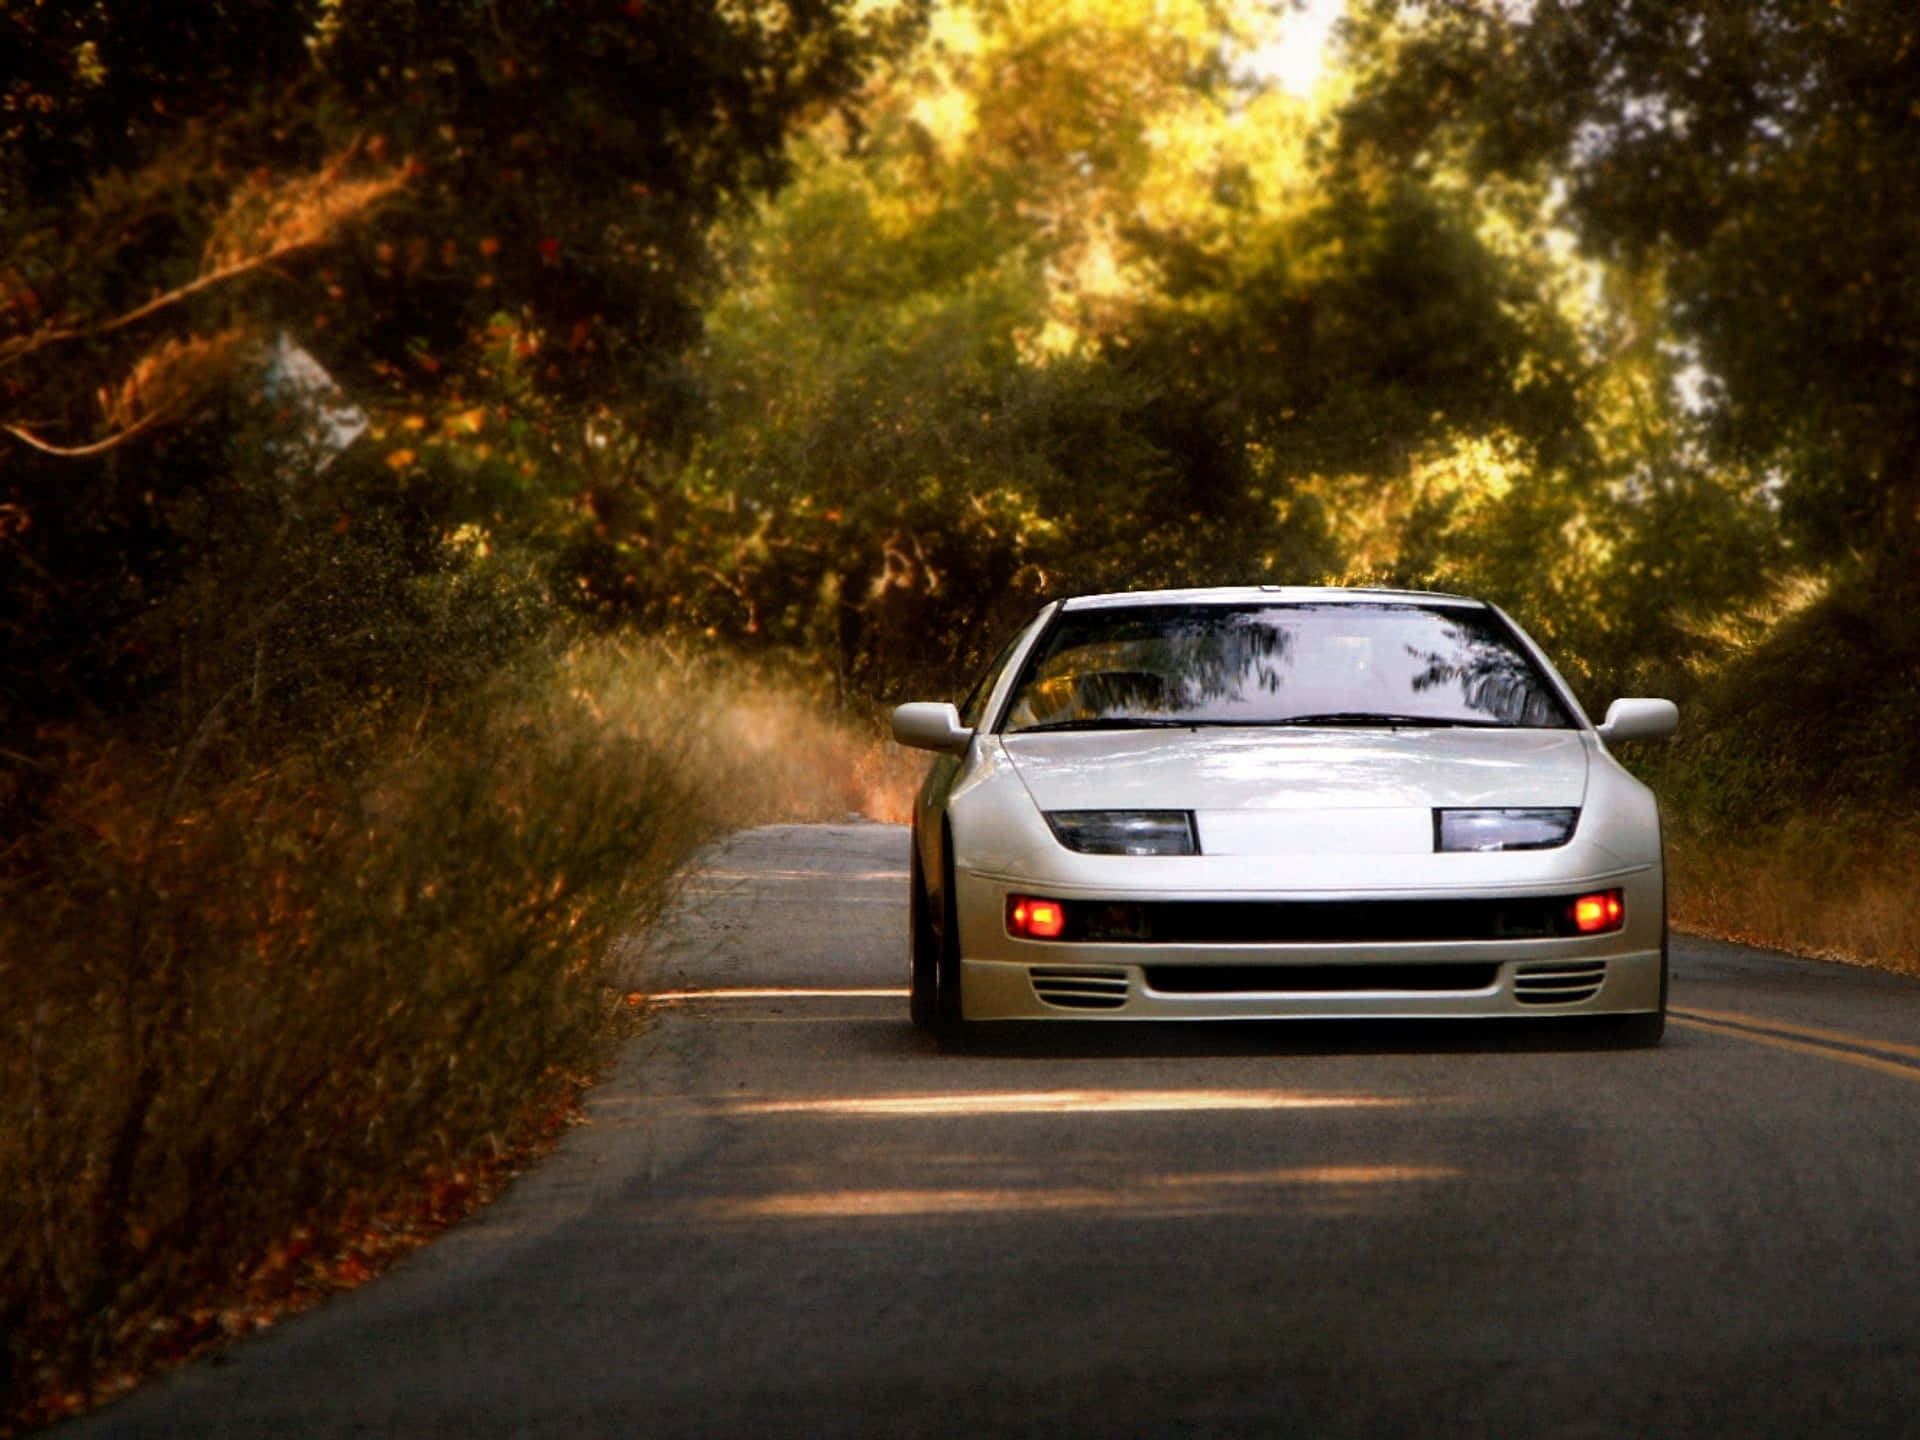 Caption: Vintage Nissan 300zx Roaring On The Road Wallpaper